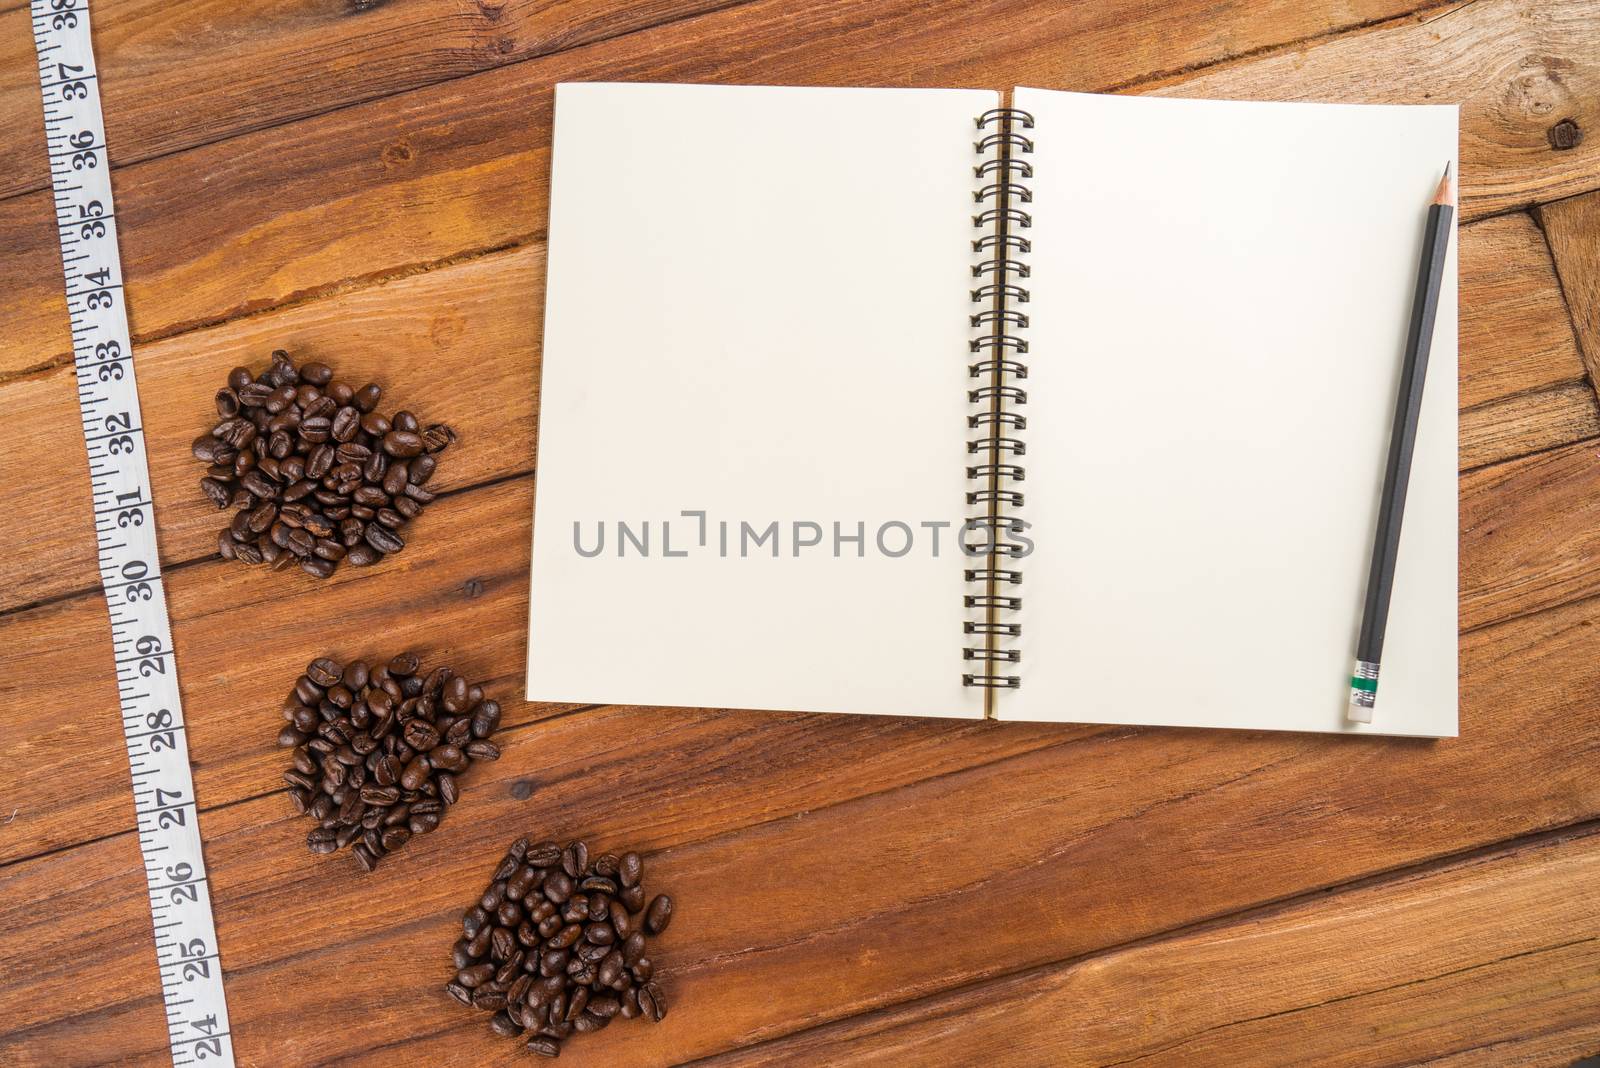 Wooden Clipboard attach planning paper with pencil on top beside coffee bean, tape measure